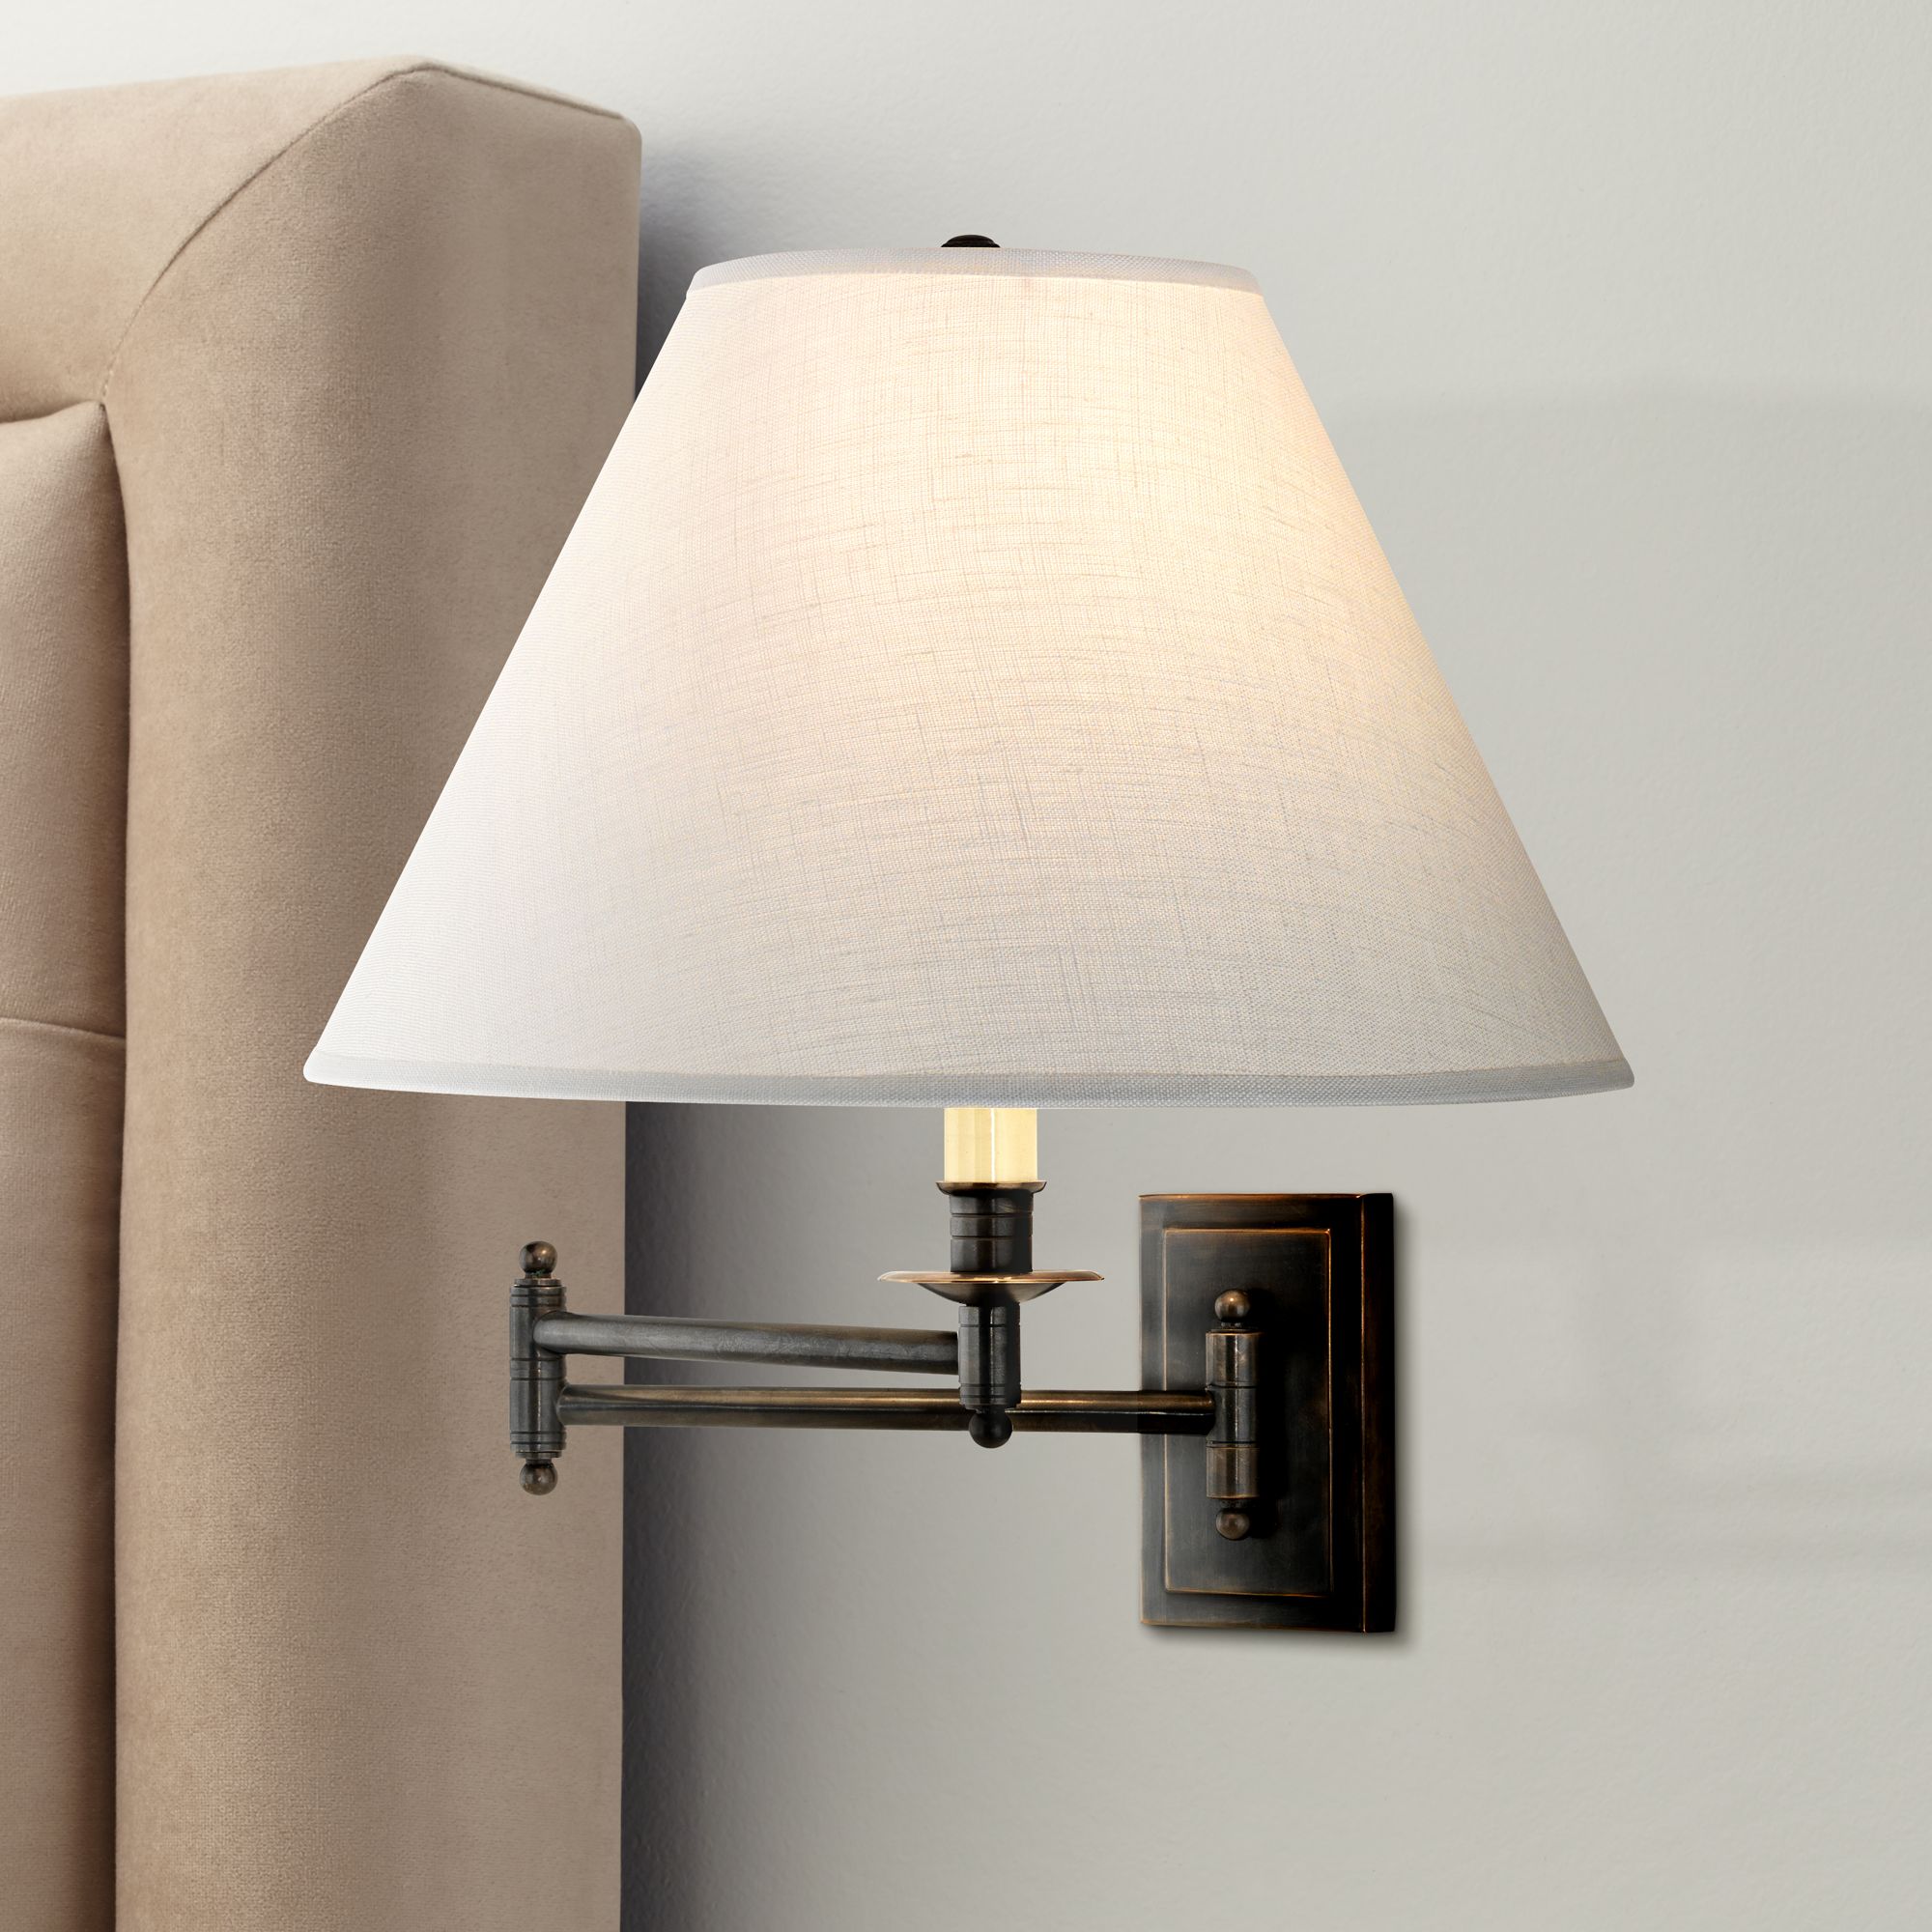 Kinetic Collection Oyster Linen Plug-In Swing Arm Wall Lamp